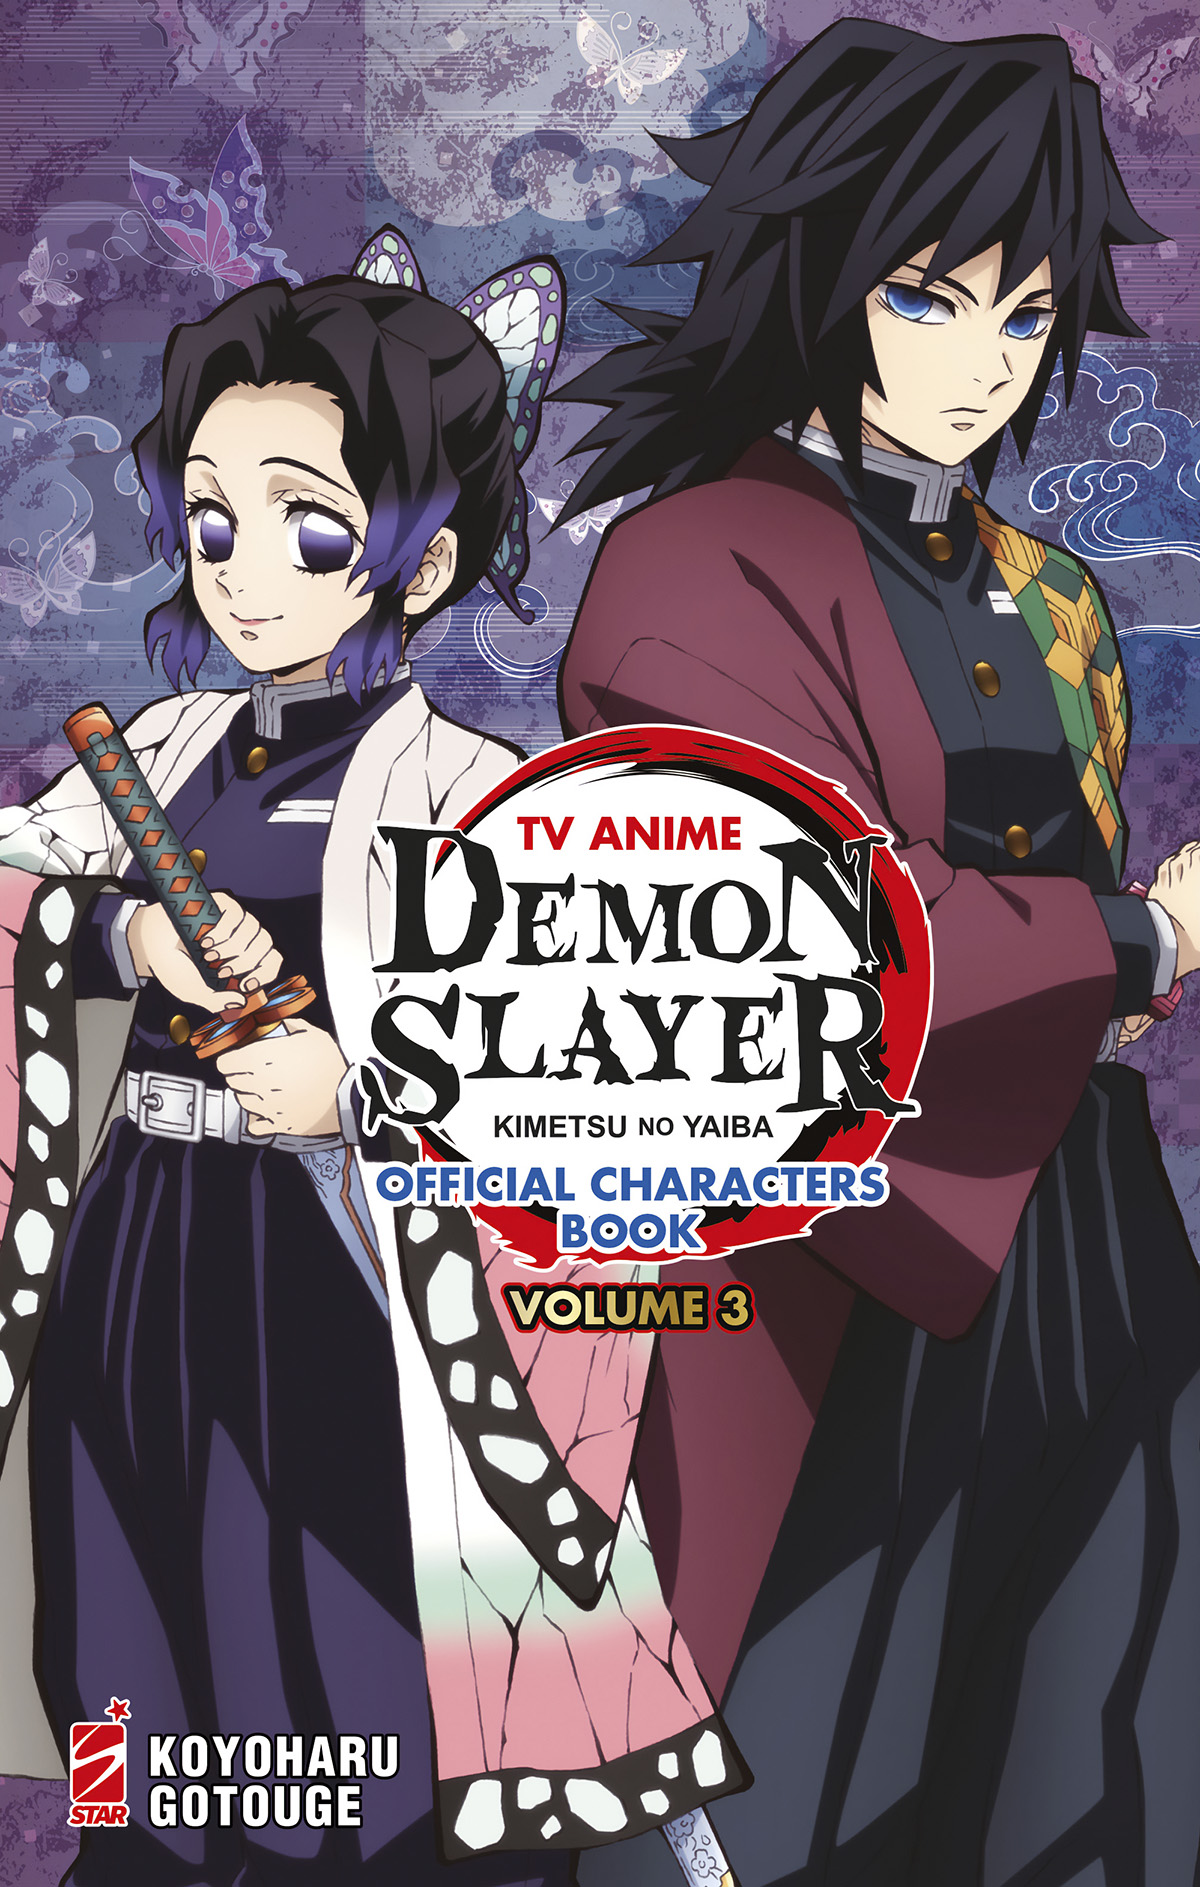 Star Comics  TV ANIME DEMON SLAYER OFFICIAL CHARACTERS BOOK 3